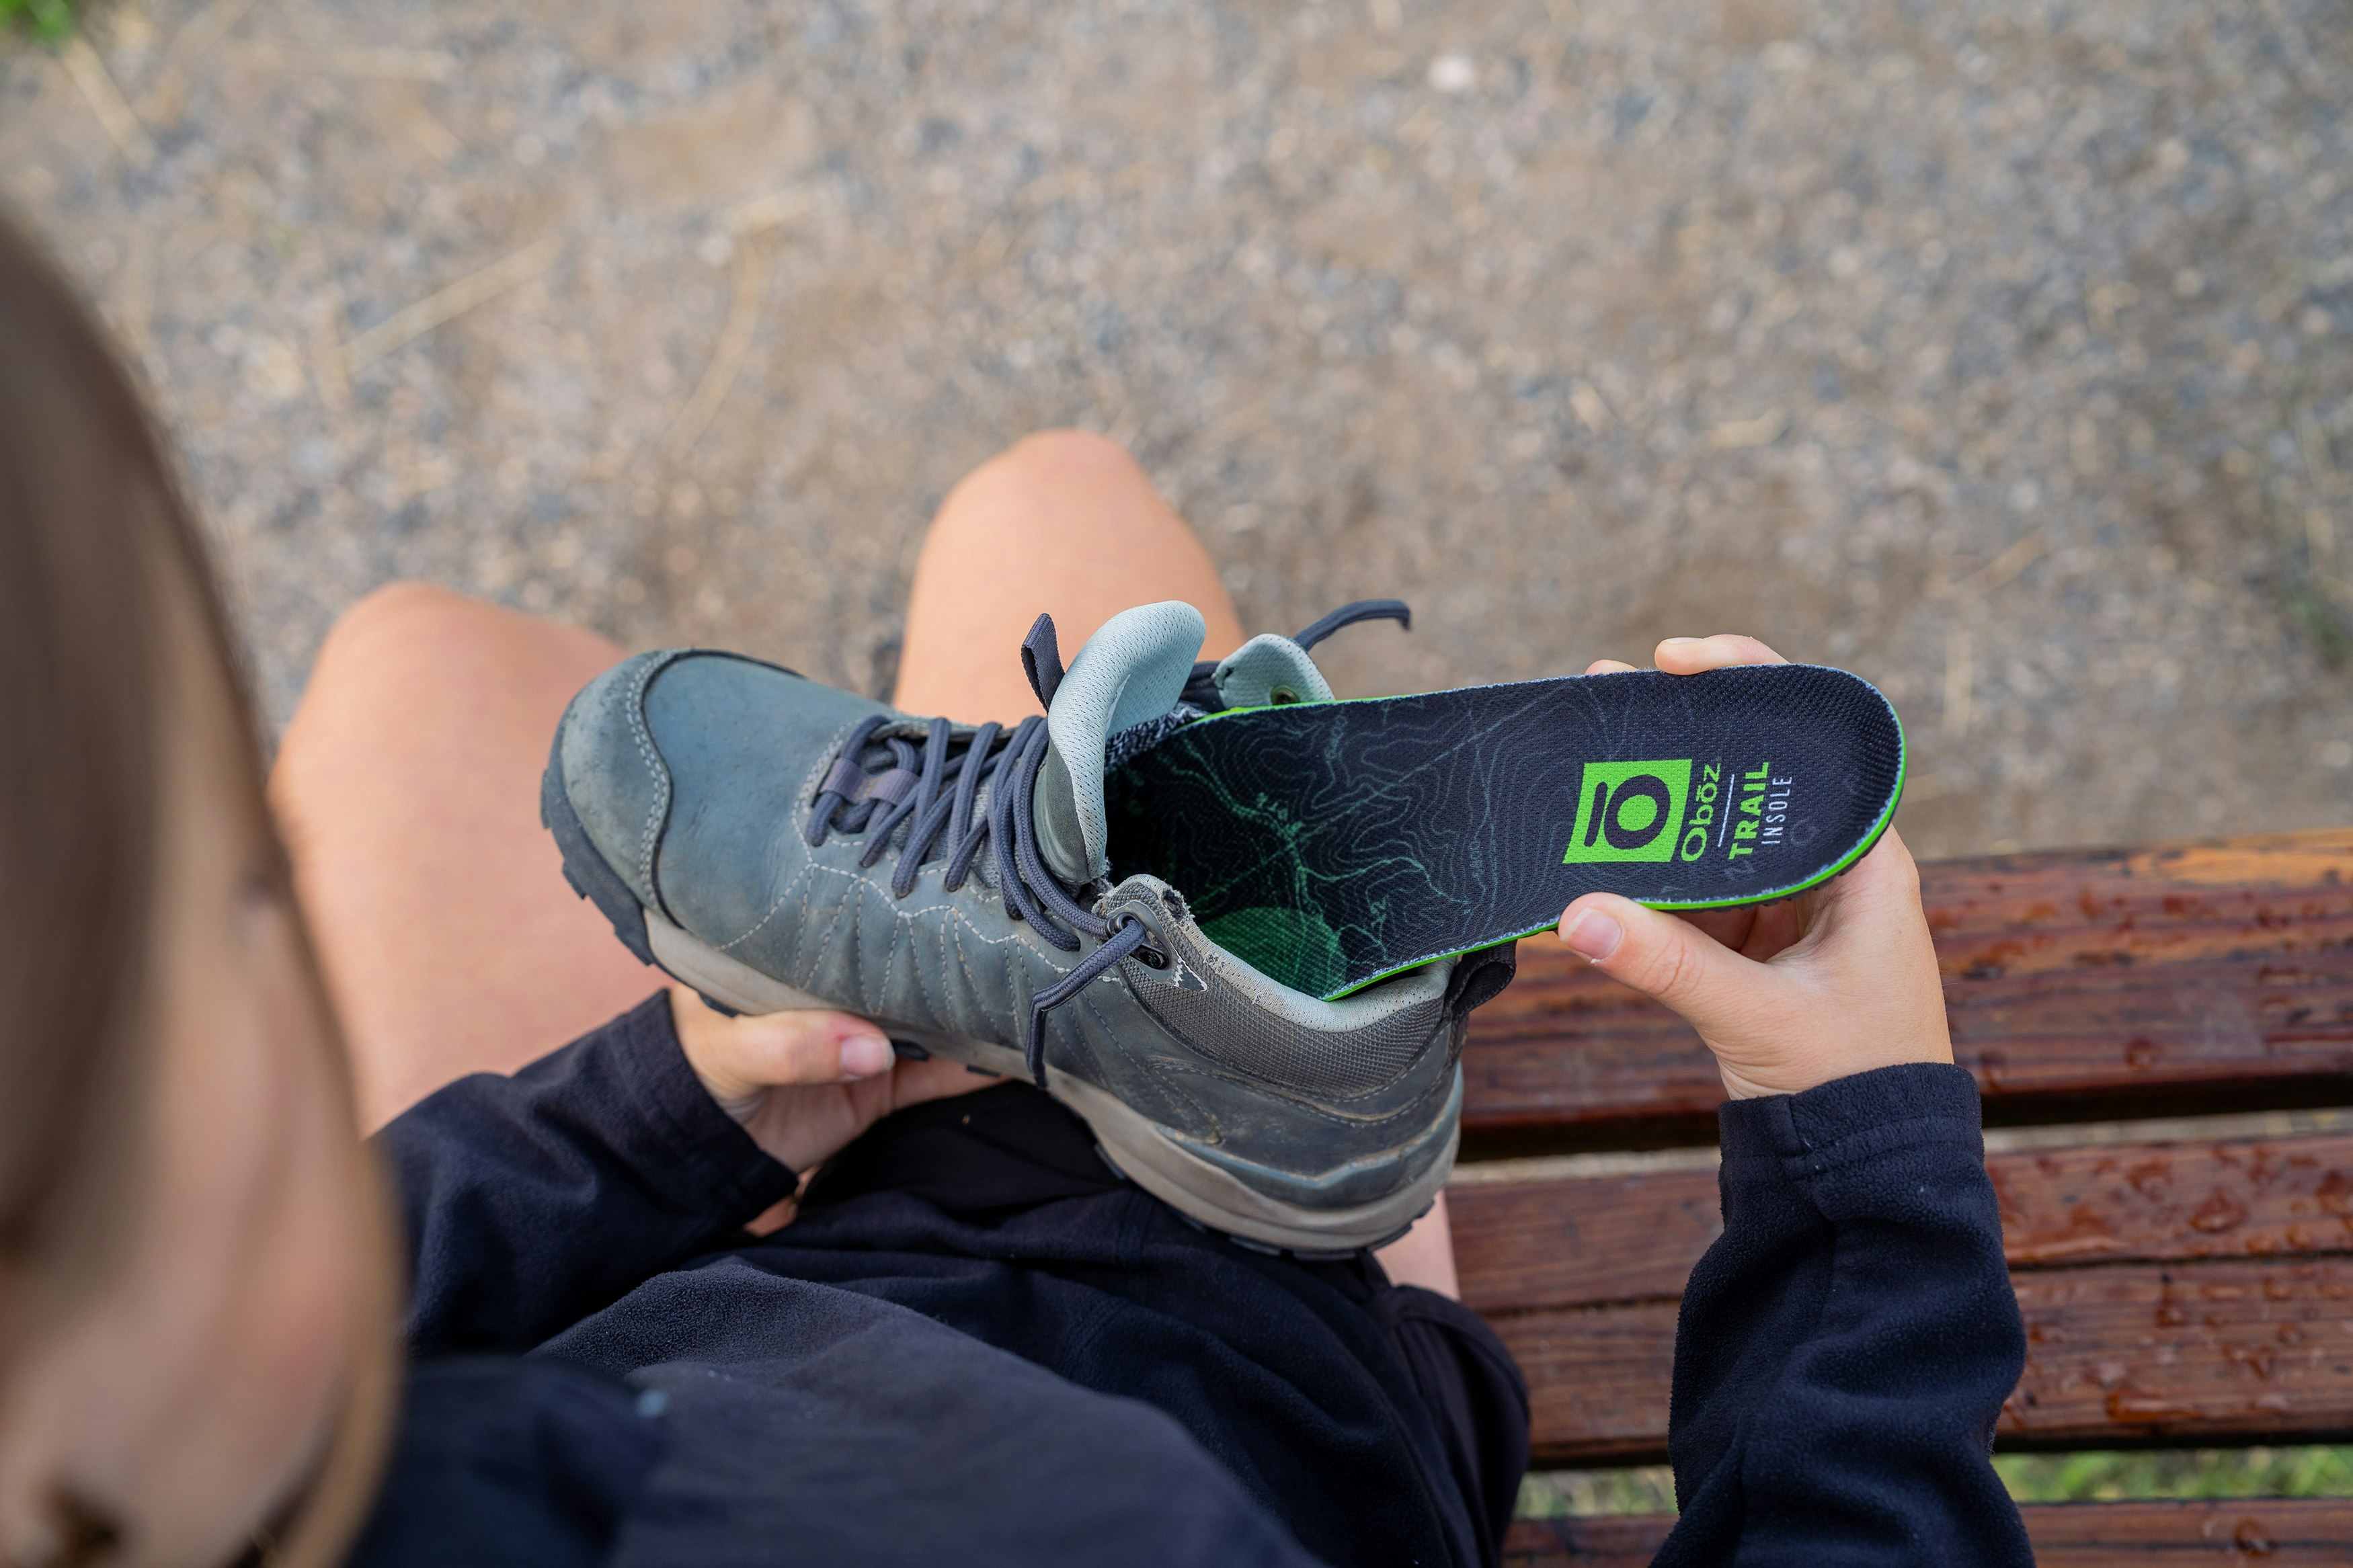 Putting the Oboz Trail insole in Oboz Sypes mid hiking shoe.